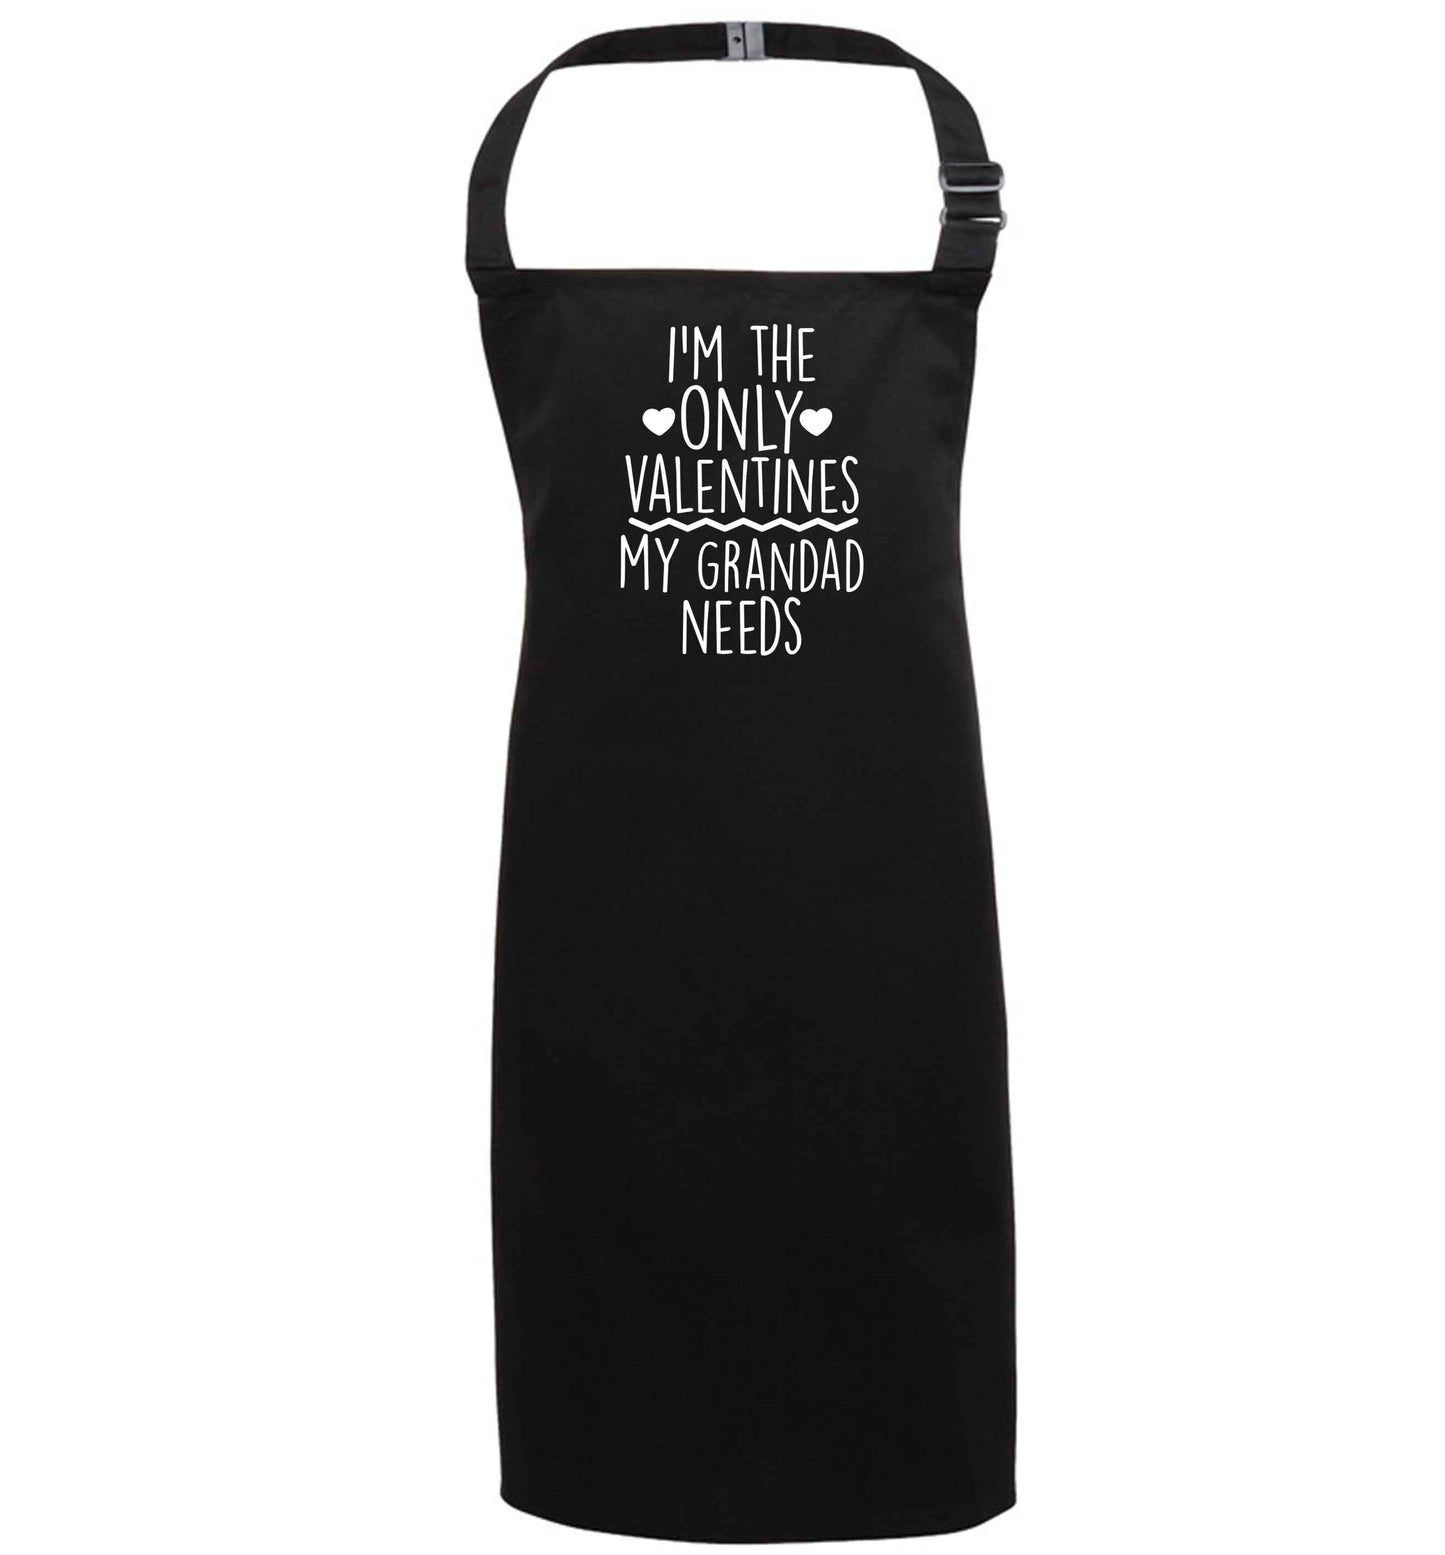 I'm the only valentines my grandad needs black apron 7-10 years